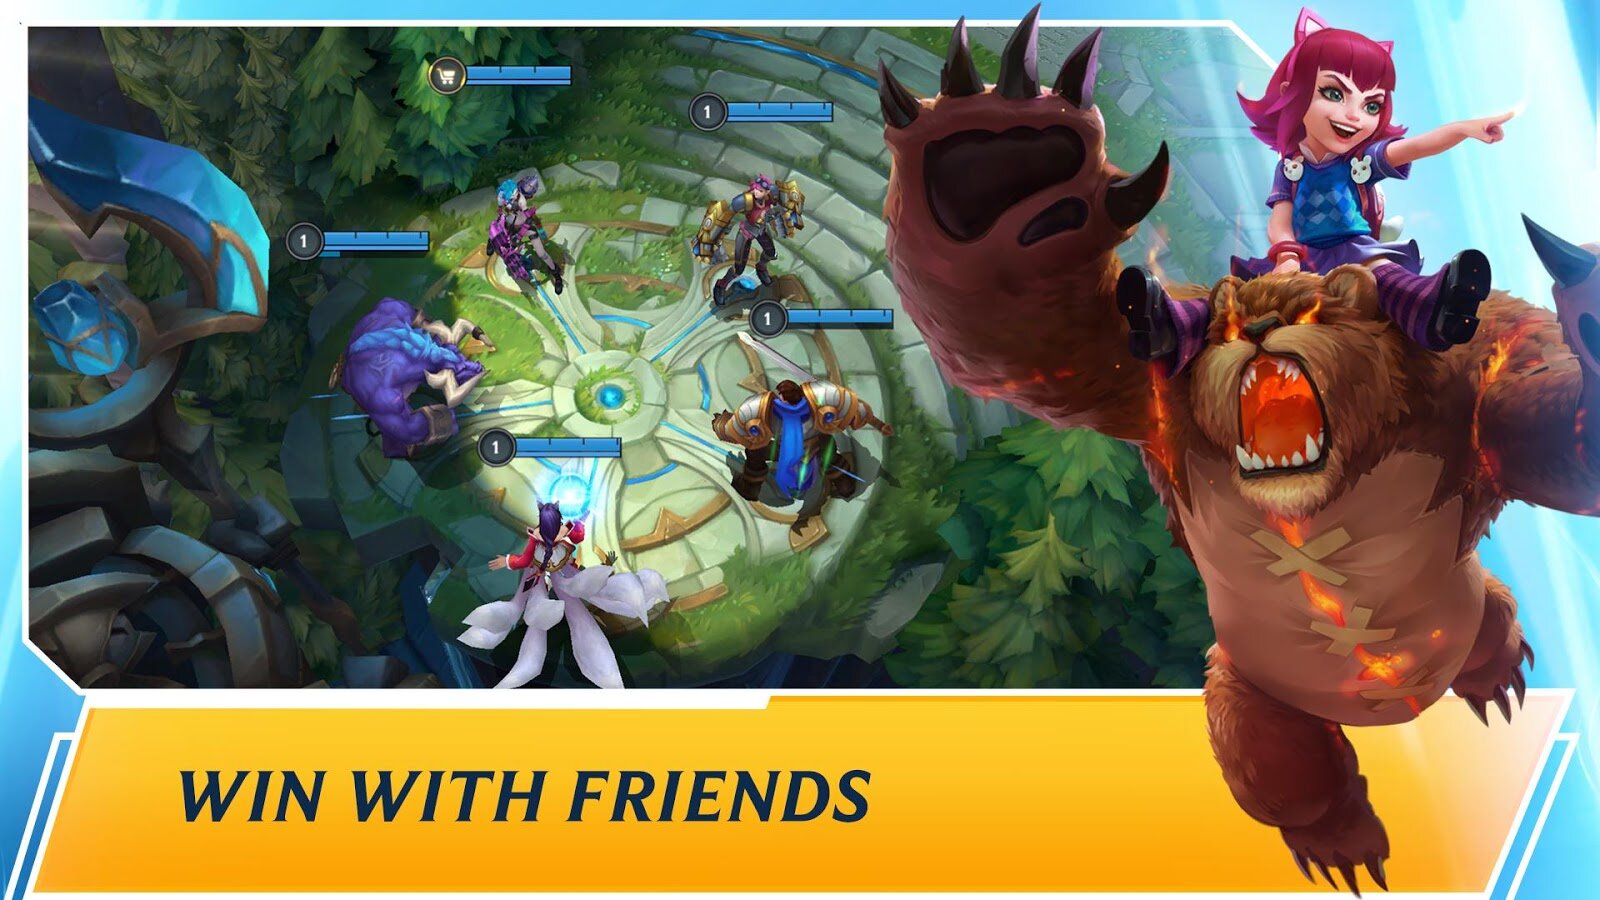 🔥 Download League of Legends Wild Rift 4.1.0.6547 APK . A vibrant strategy  RPG from the creators of the PC version of League of Legends 